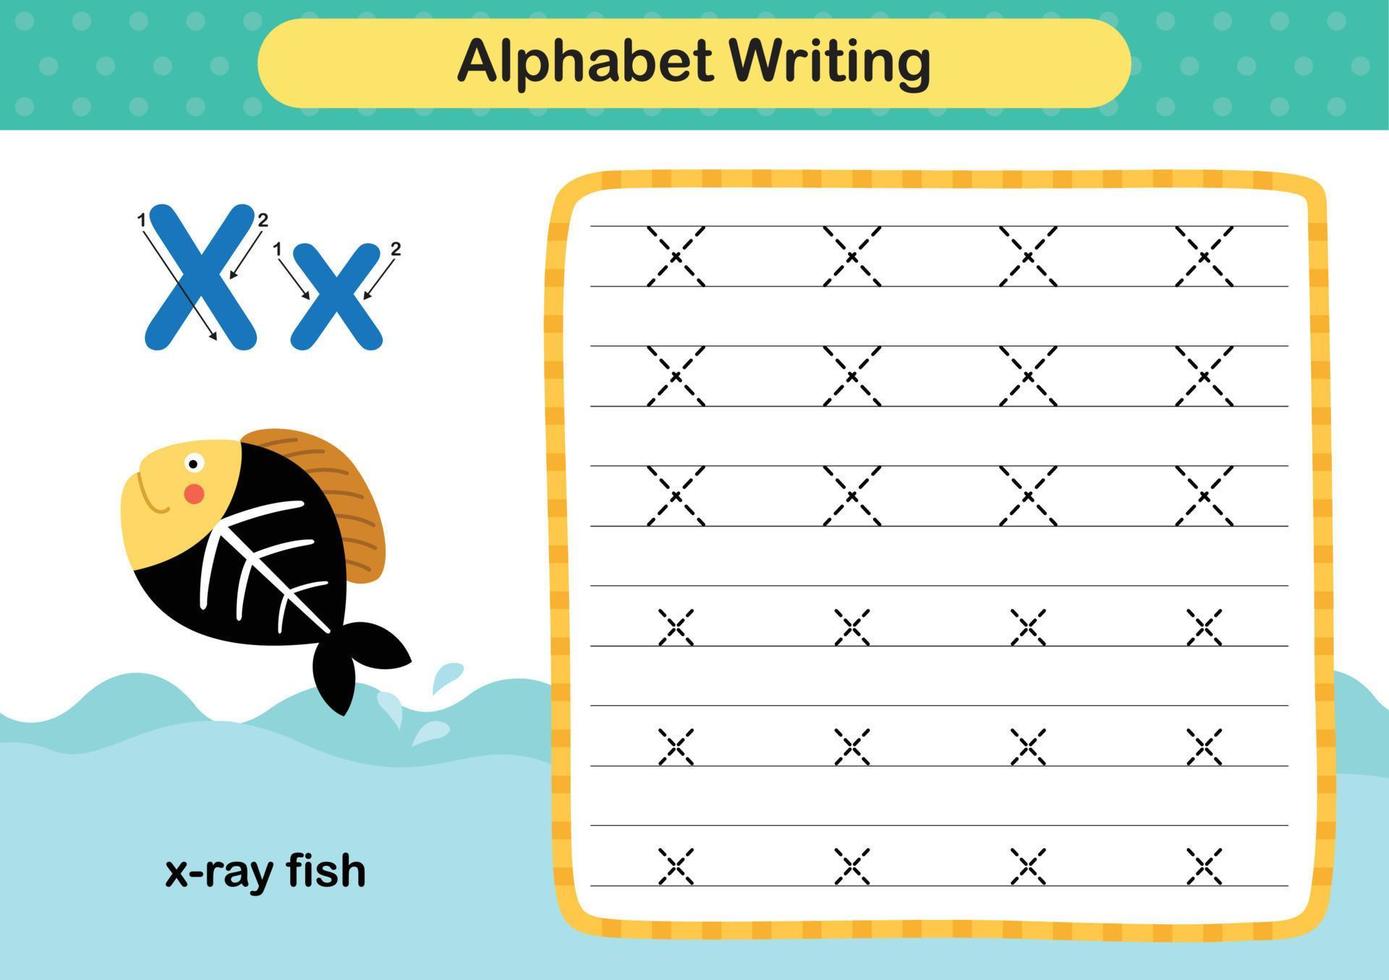 Alphabet Letter  X - x ray fish exercise with cartoon vocabulary illustration, vector